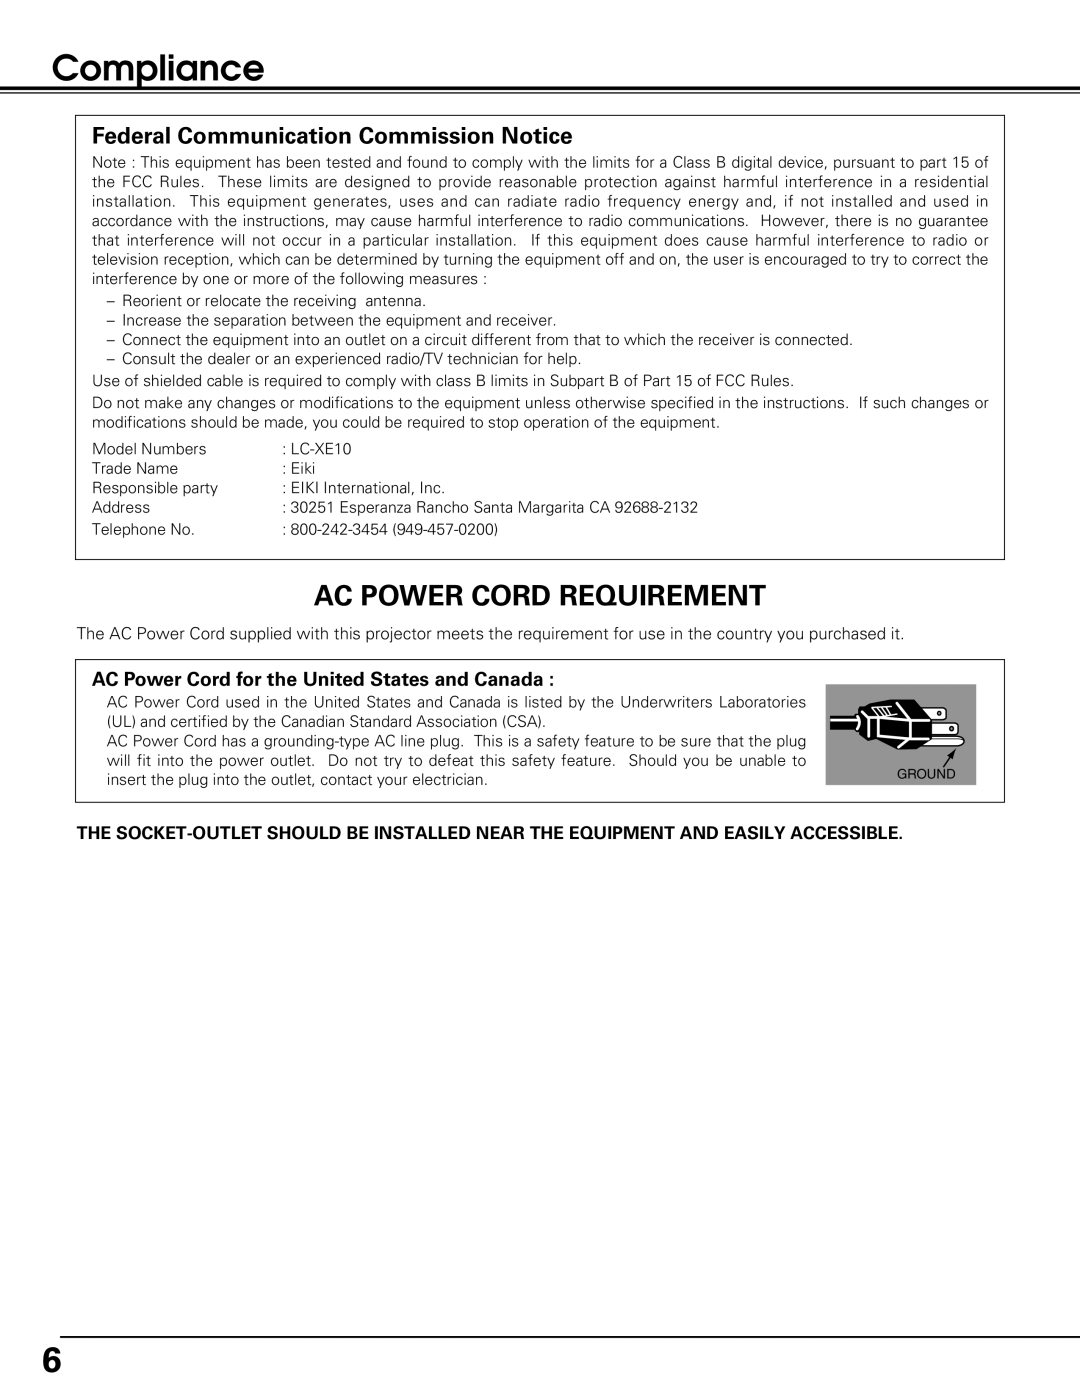 Eiki LC-XE10 instruction manual Compliance, Ac Power Cord Requirement, Federal Communication Commission Notice 